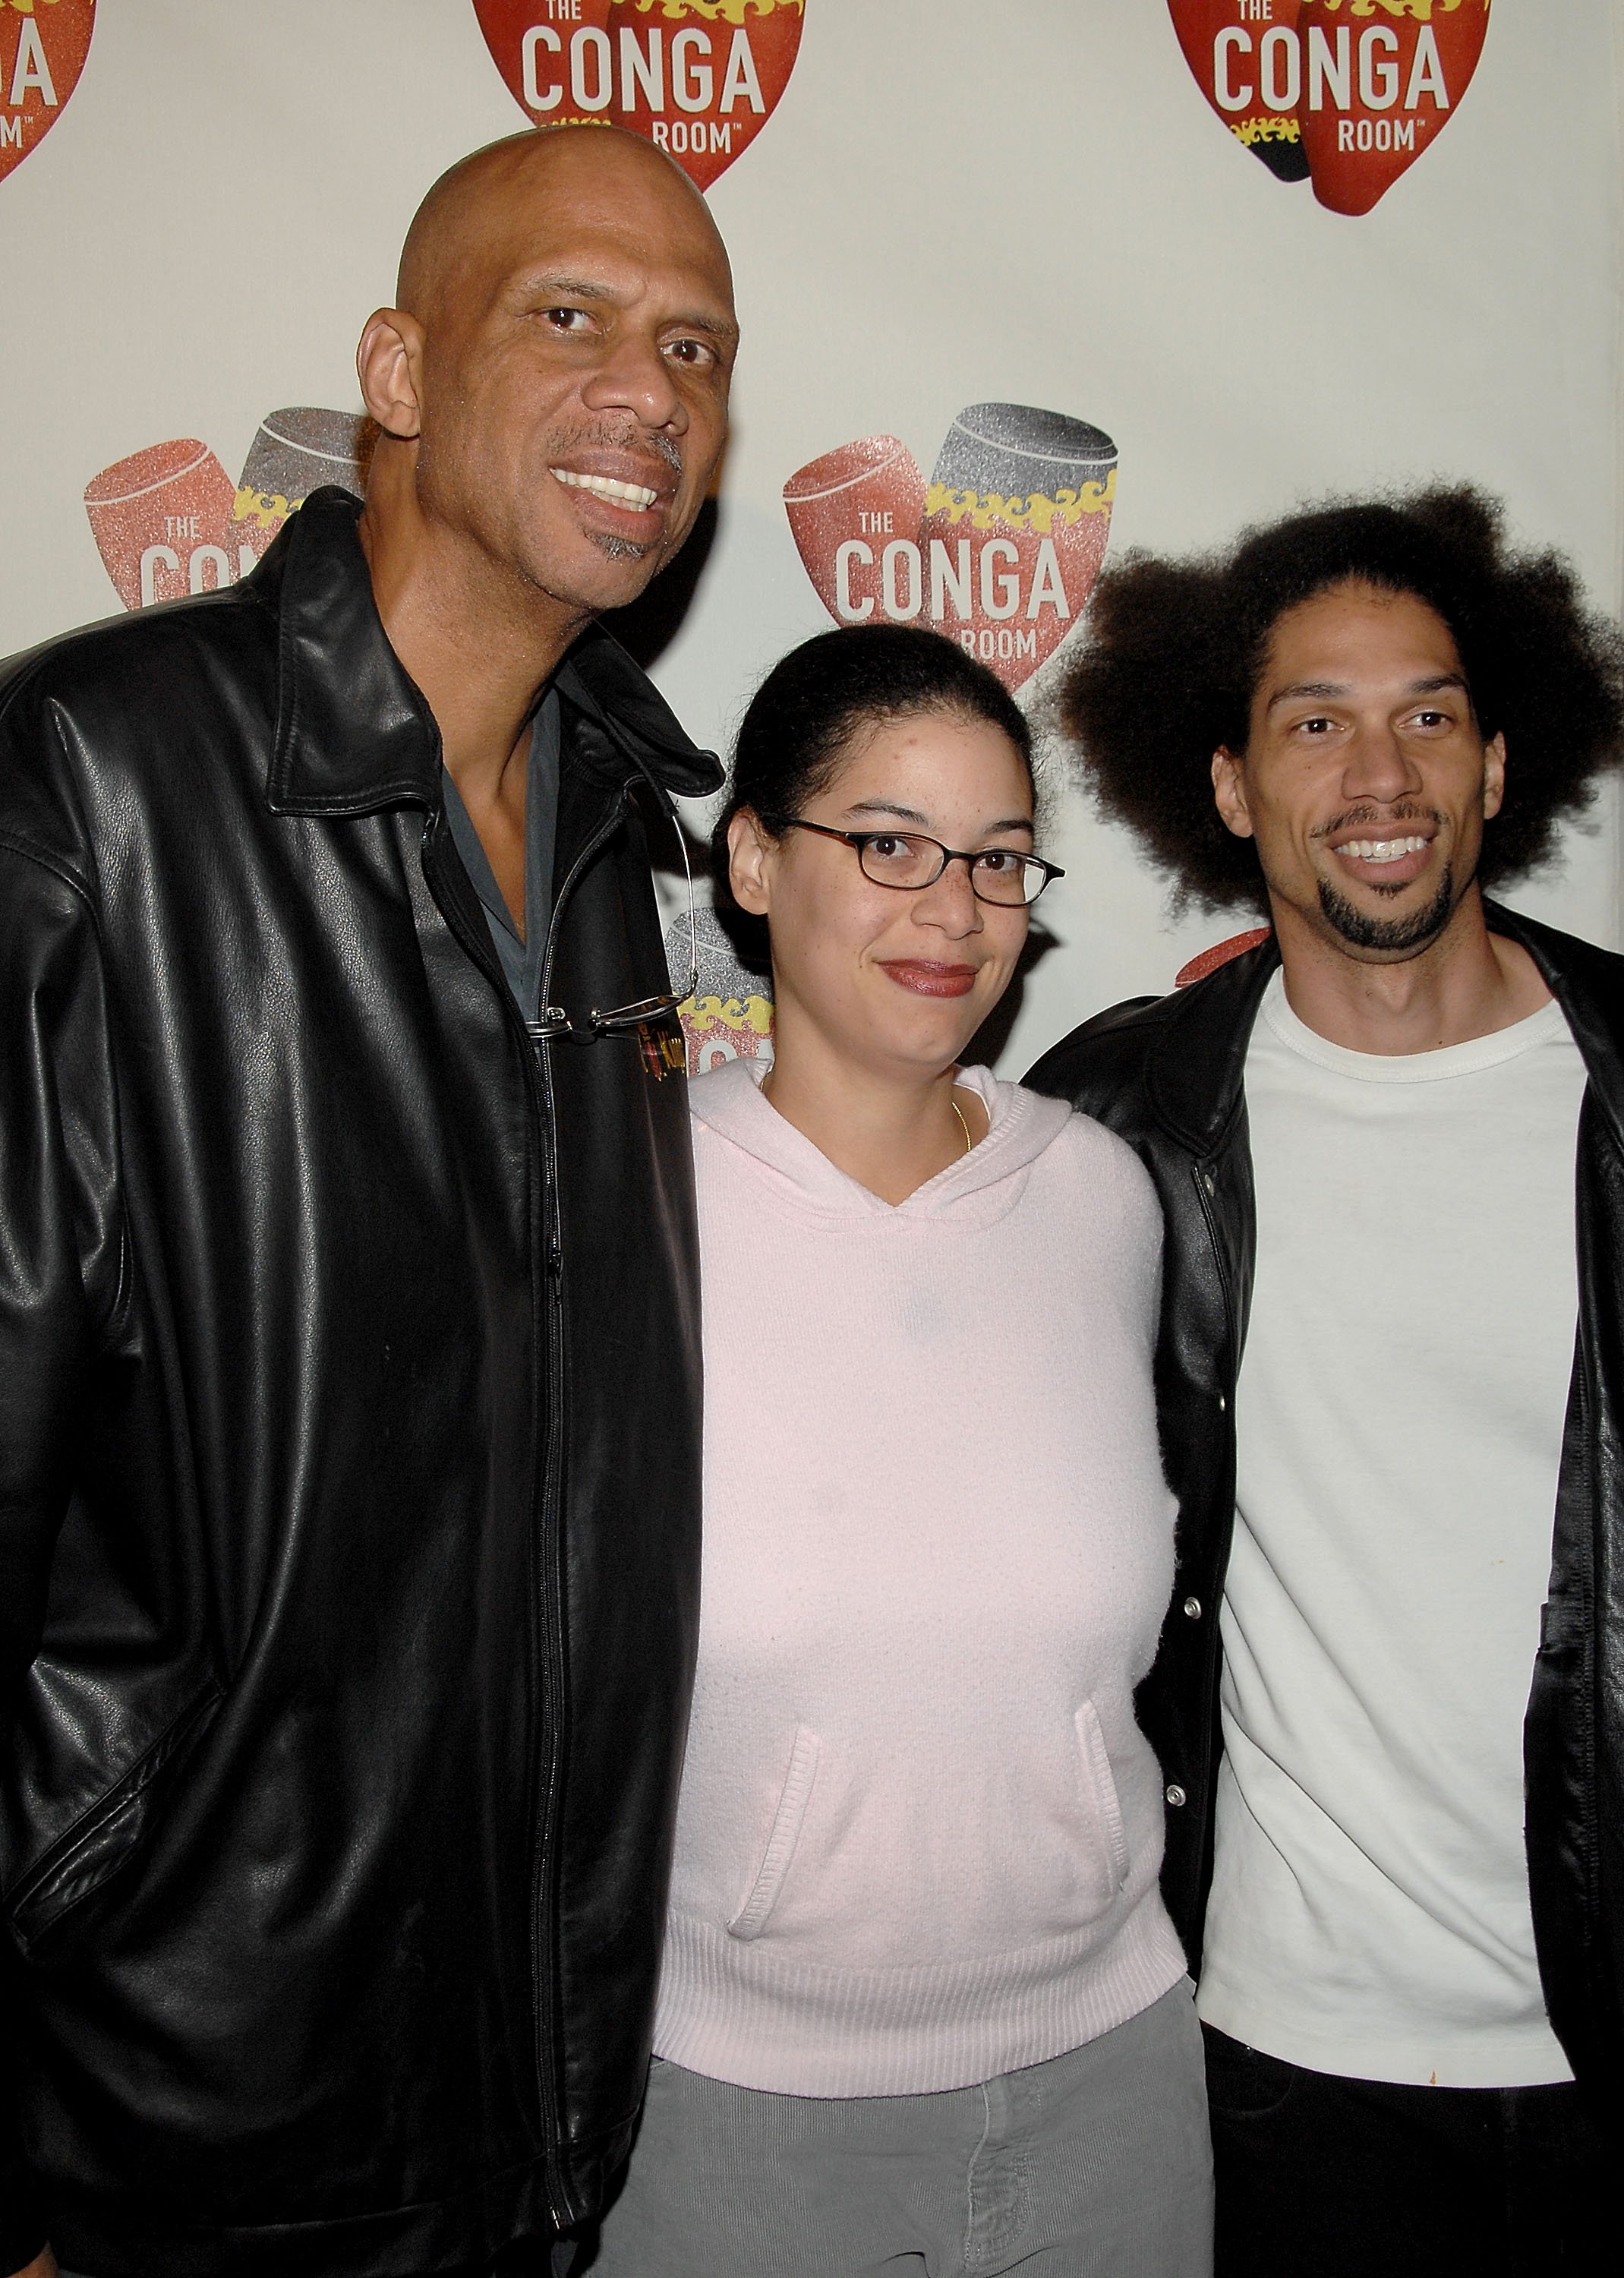 Kareem Abdul-Jabbar and his children at the opening of the Conga Room on December 10, 2008, in California | Source: Getty Images 